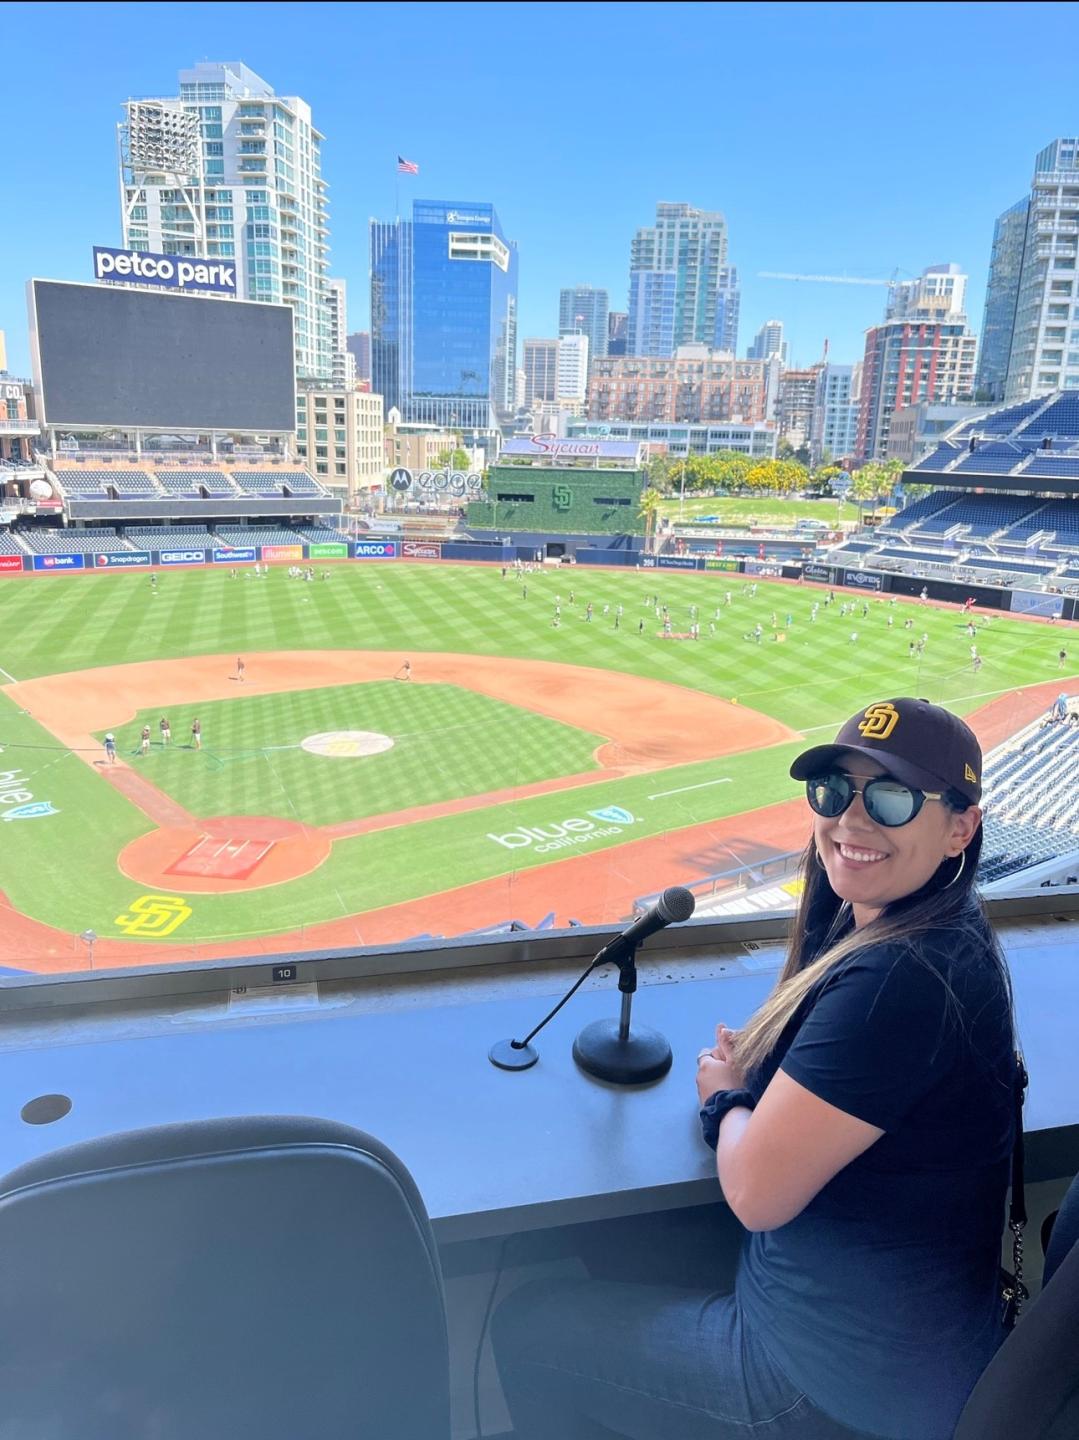 Czarina in the announcer booth at petco park